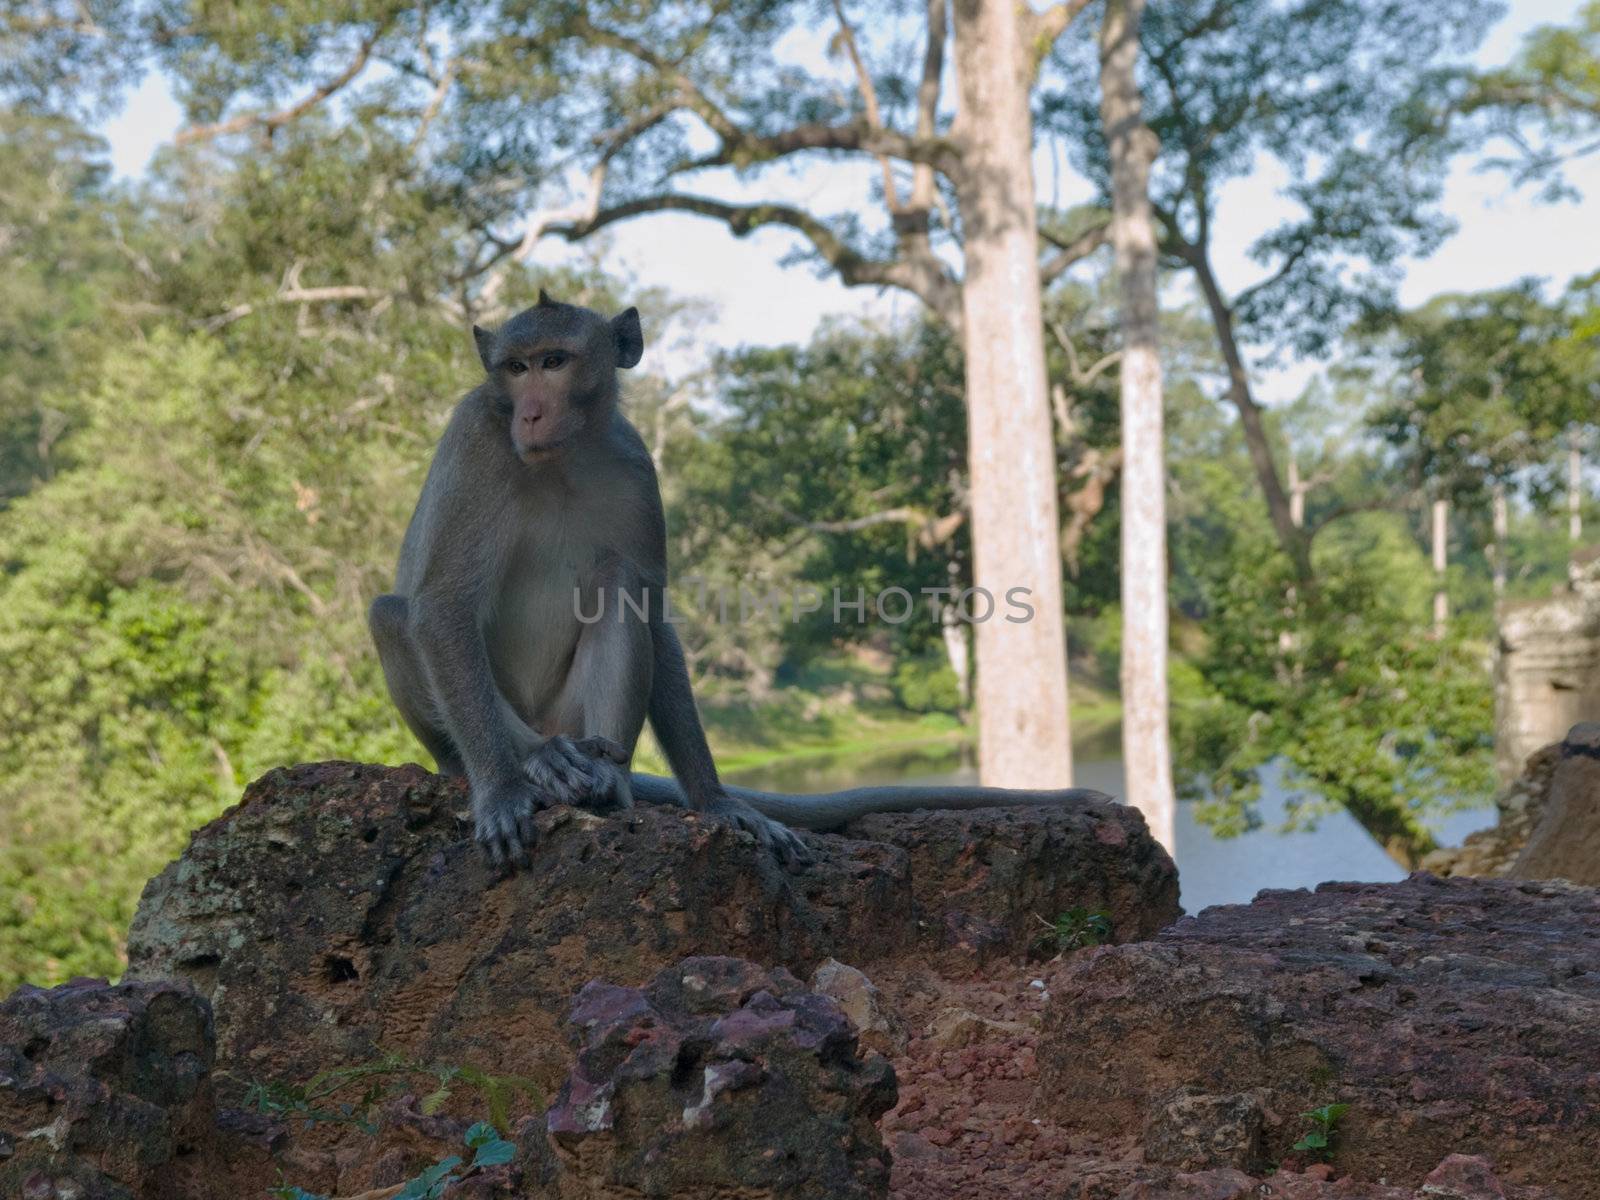 the picture of the wild monkey from siem riep, Cambodia